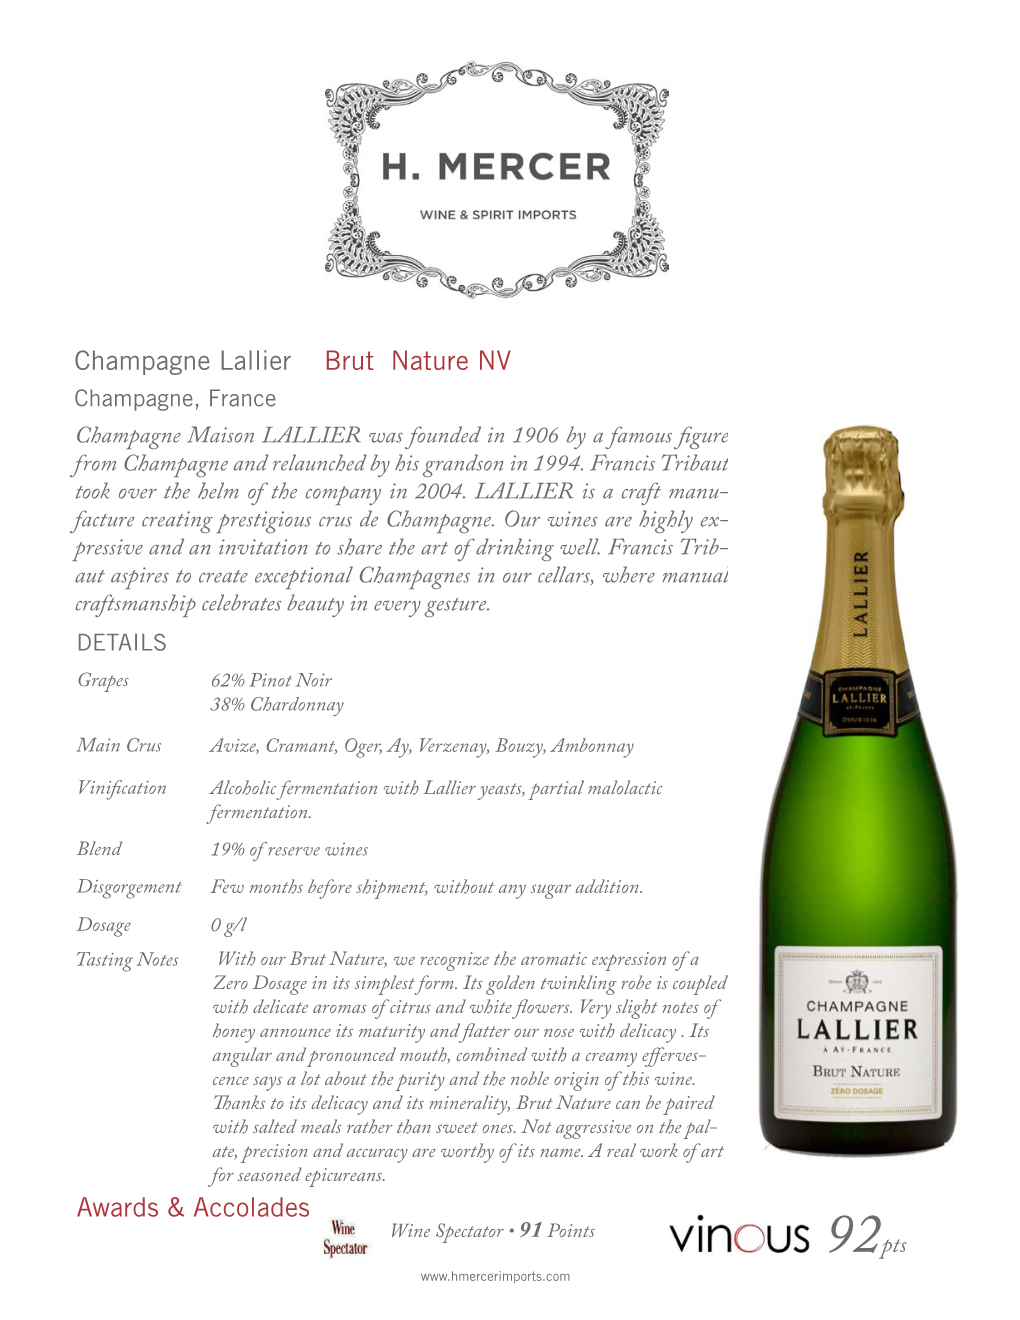 Champagne Lallier Brut Nature NV Awards & Accolades